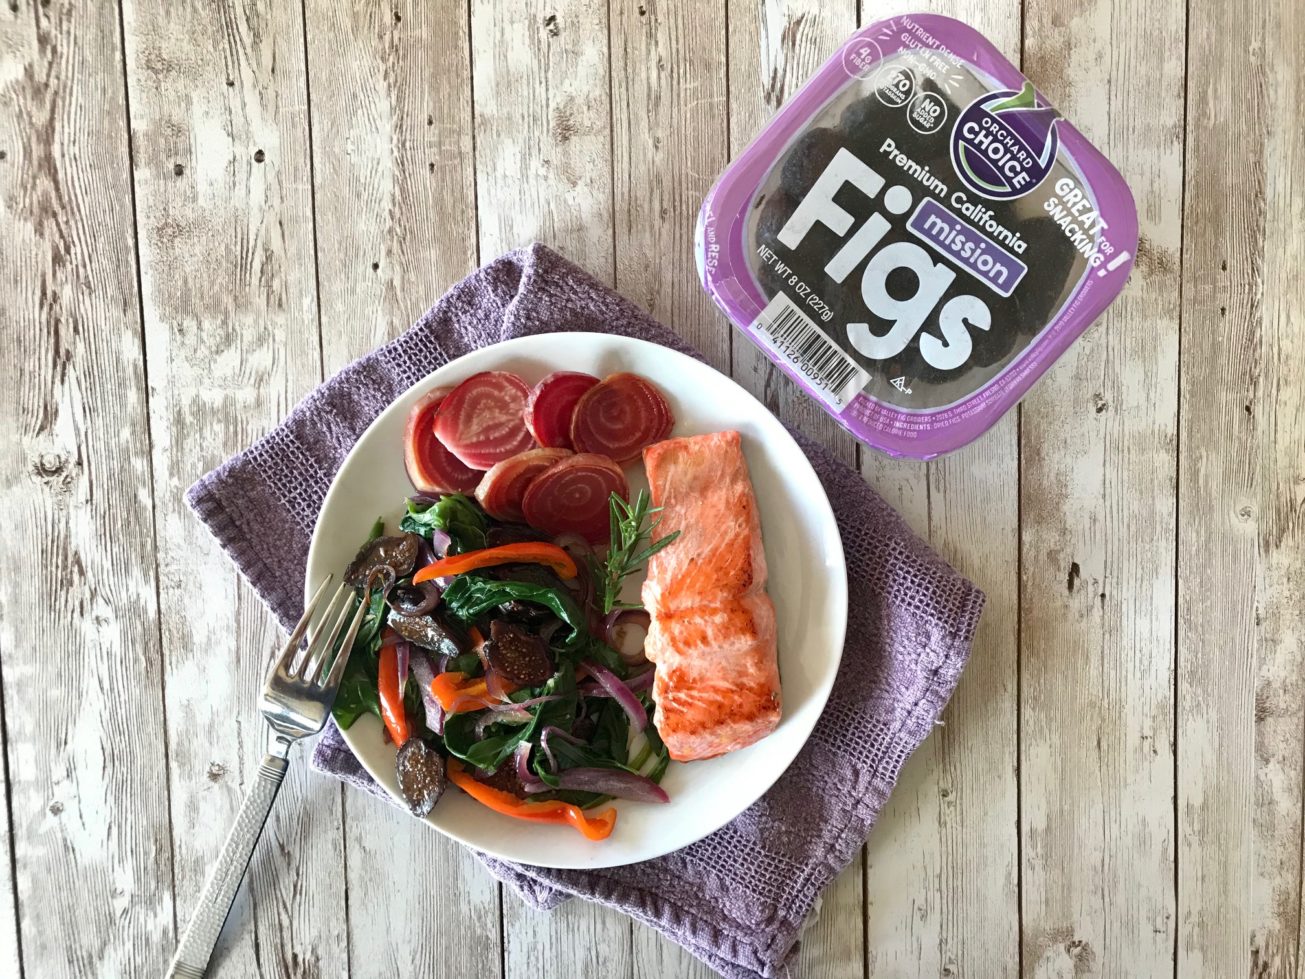 Pan-seared salmon with sauteed beet greens is a delicious way to increase your potassium with dried figs at dinner.